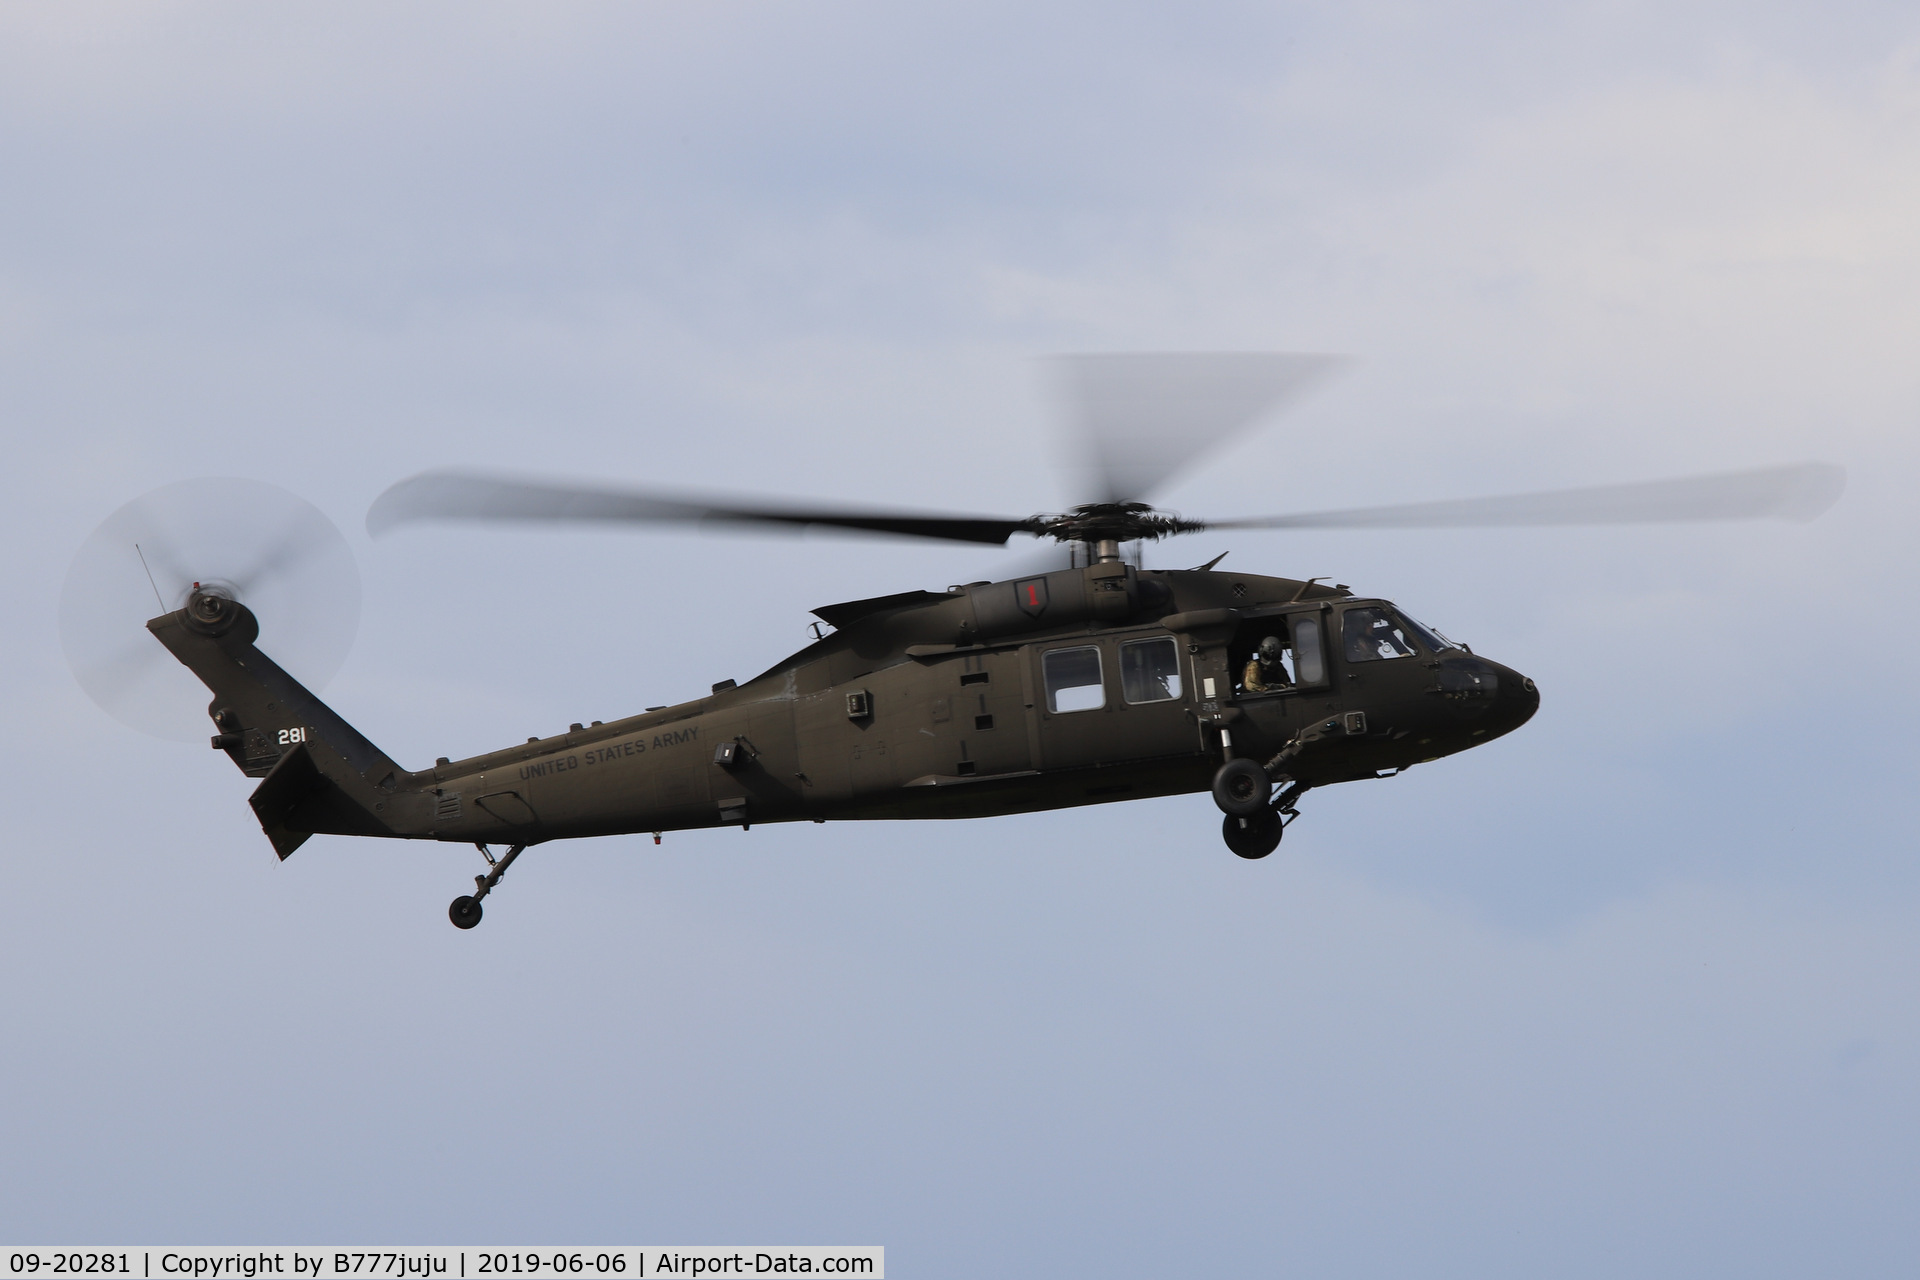 09-20281, Sikorsky UH-60M Black Hawk C/N Not found 09-20281, for 75 D-Day anniversary
at Carentan